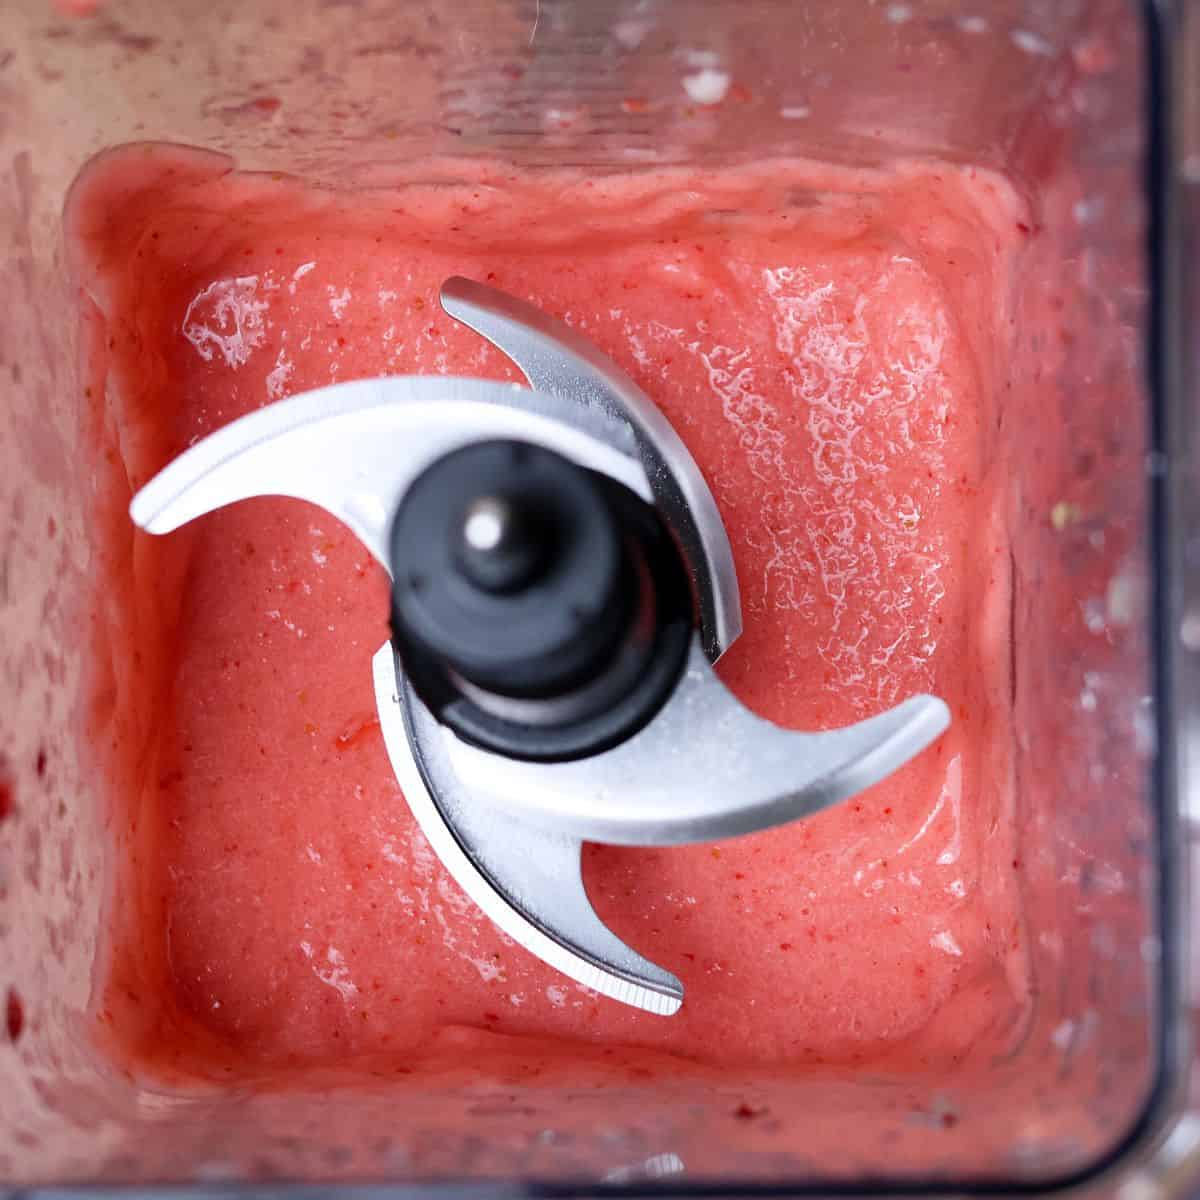 Top view of a blender with a freshly blended pink strawberry smoothie, the blades coated with the thick mixture.